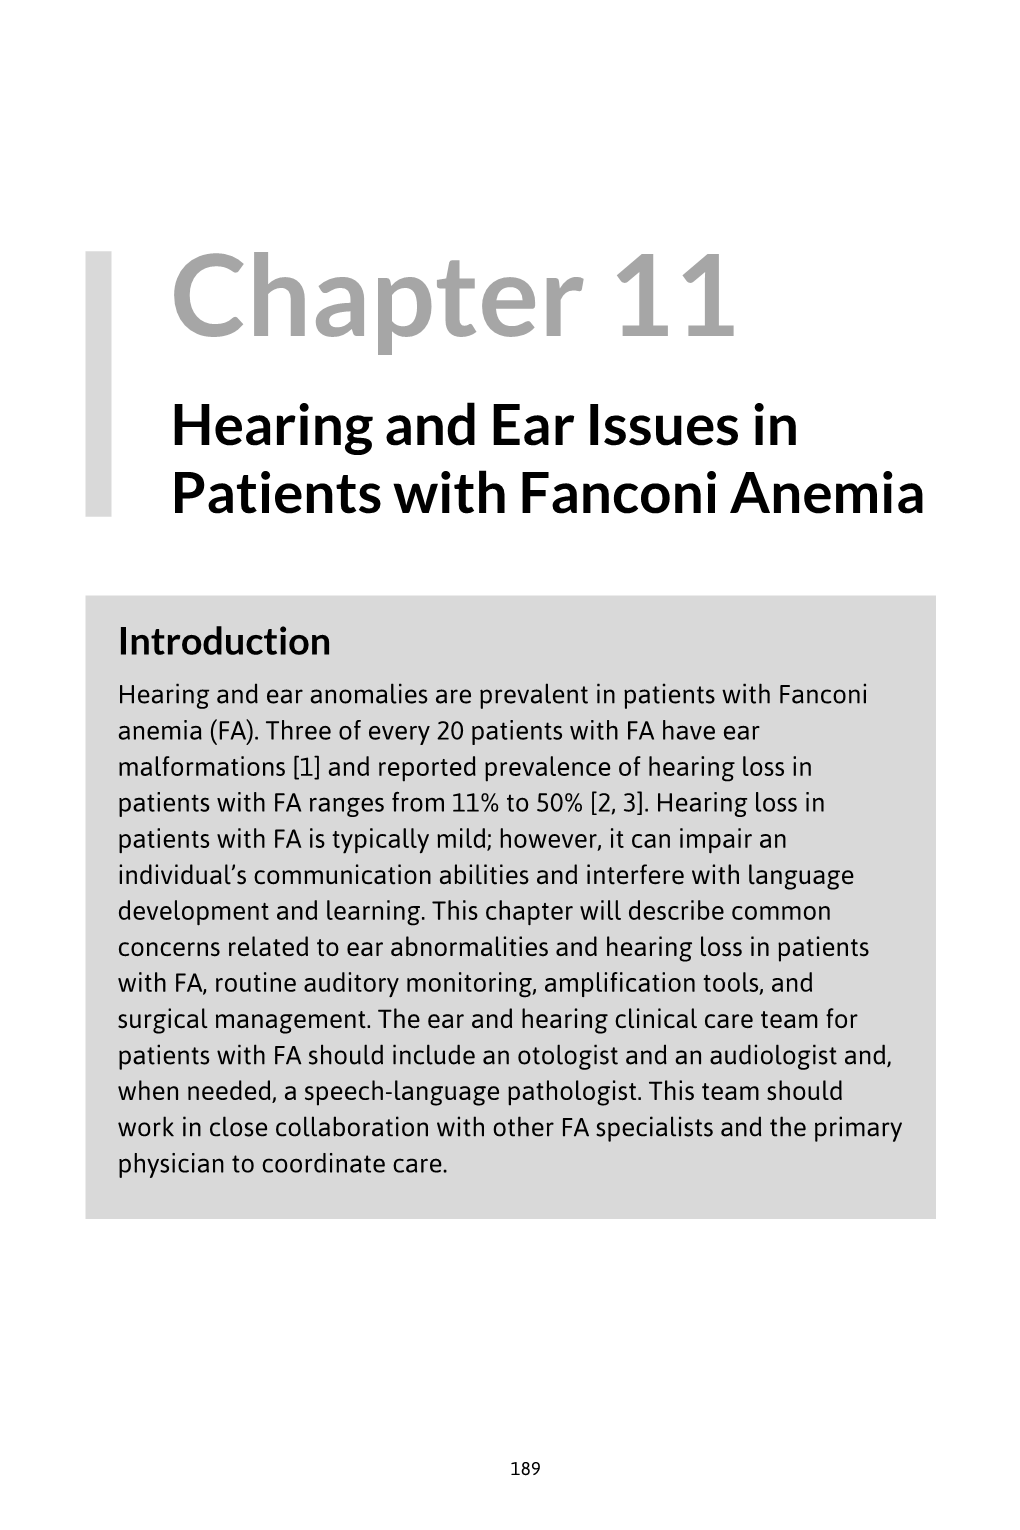 Chapter 11: Hearing and Ear Issues in Patients with Fanconi Anemia